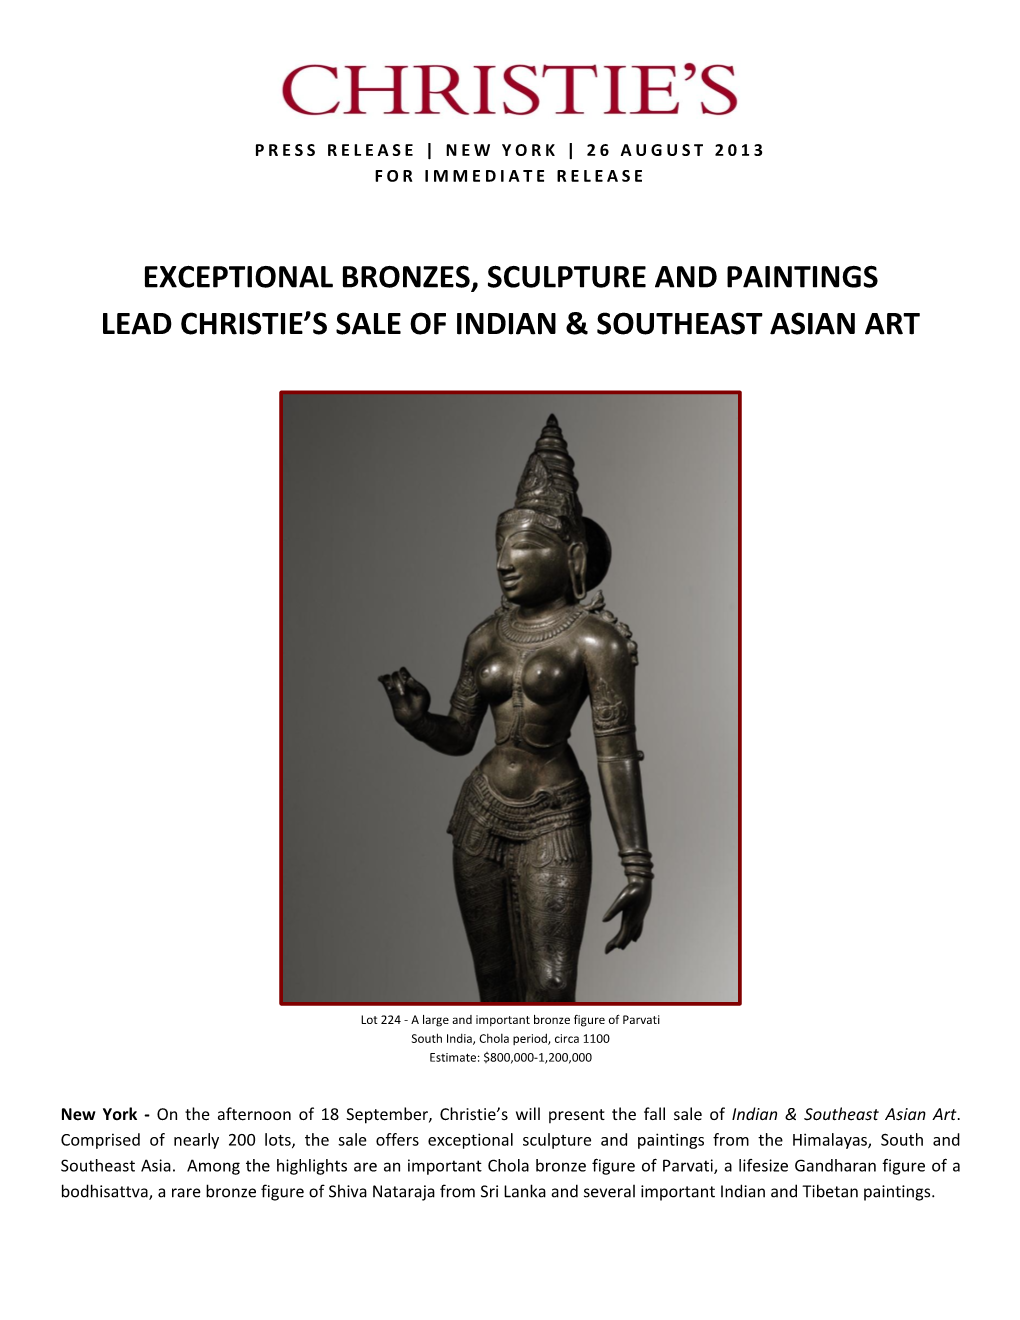 Exceptional Bronzes, Sculpture and Paintings Lead Christie’S Sale of Indian & Southeast Asian Art